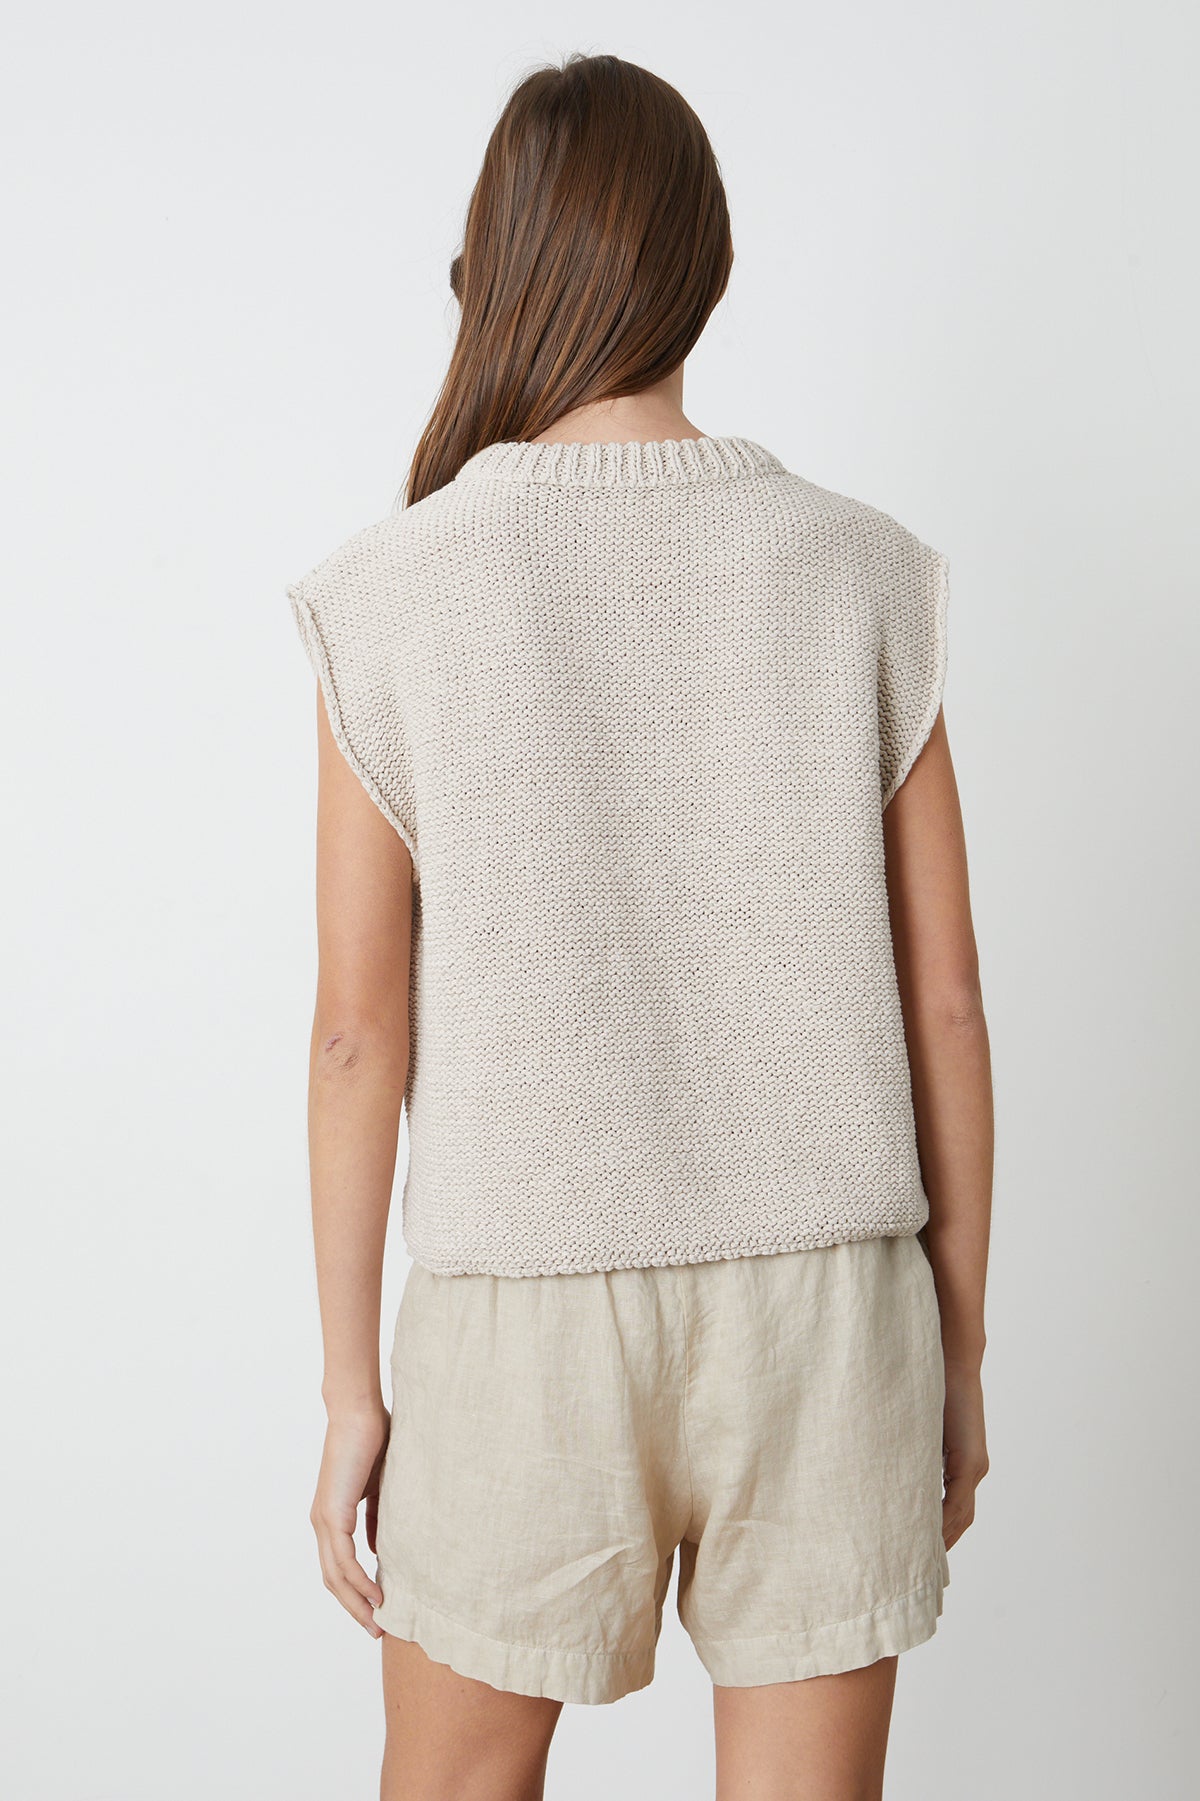 the back view of a woman wearing a Velvet by Graham & Spencer SAGE CREW NECK SWEATER and shorts.-26342770737345